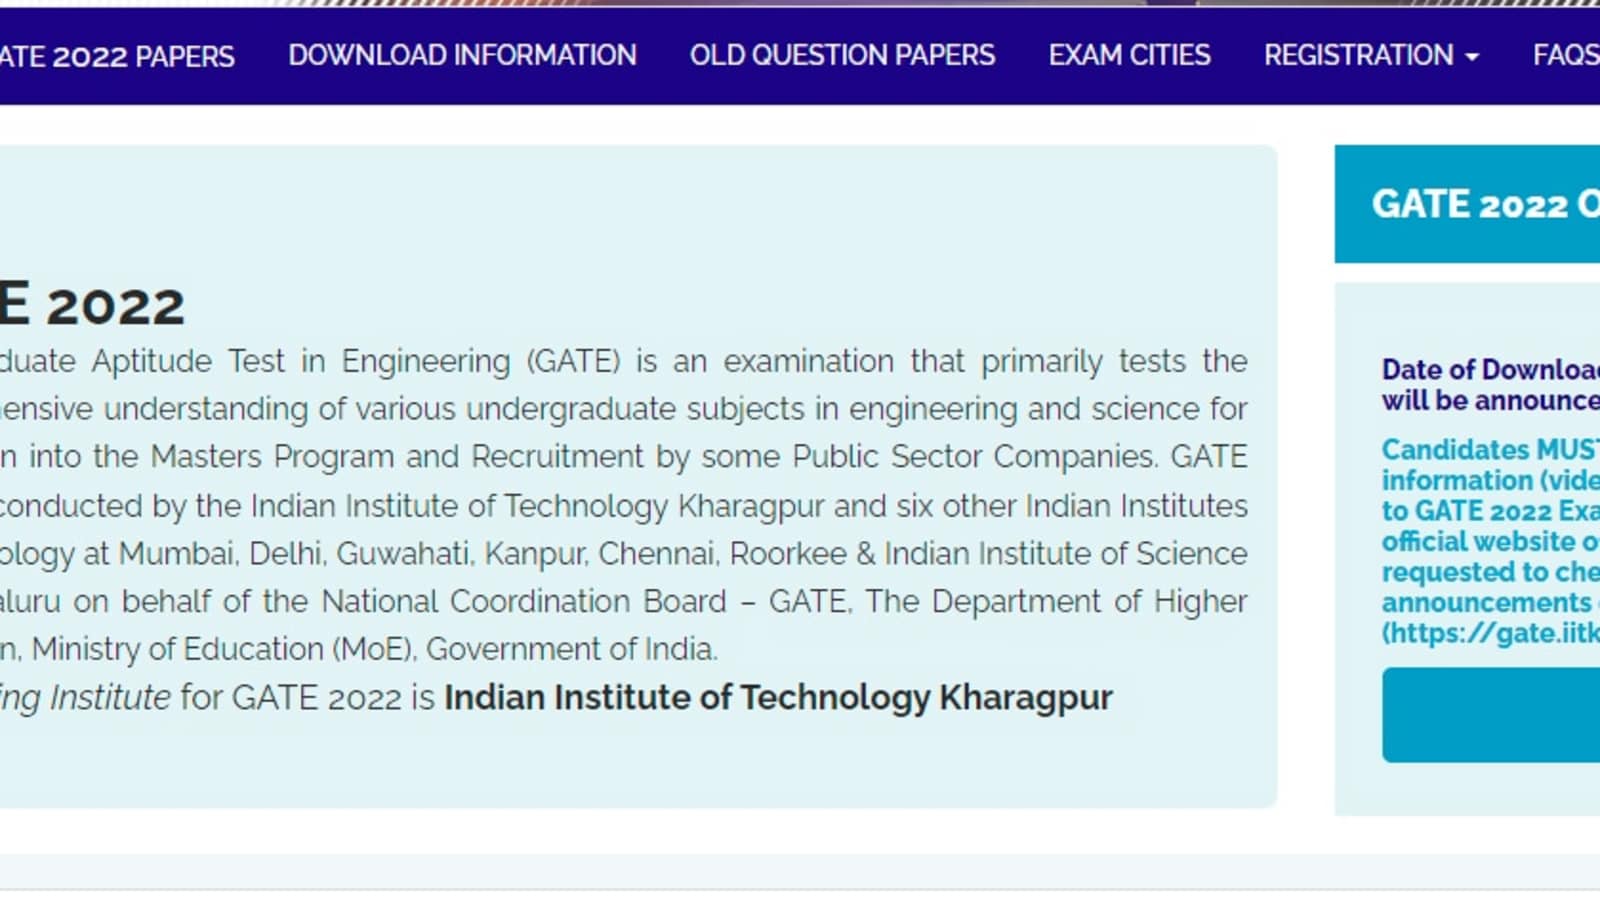 GATE Admit Card 2022 releasing today on gate.iitkgp.ac.in